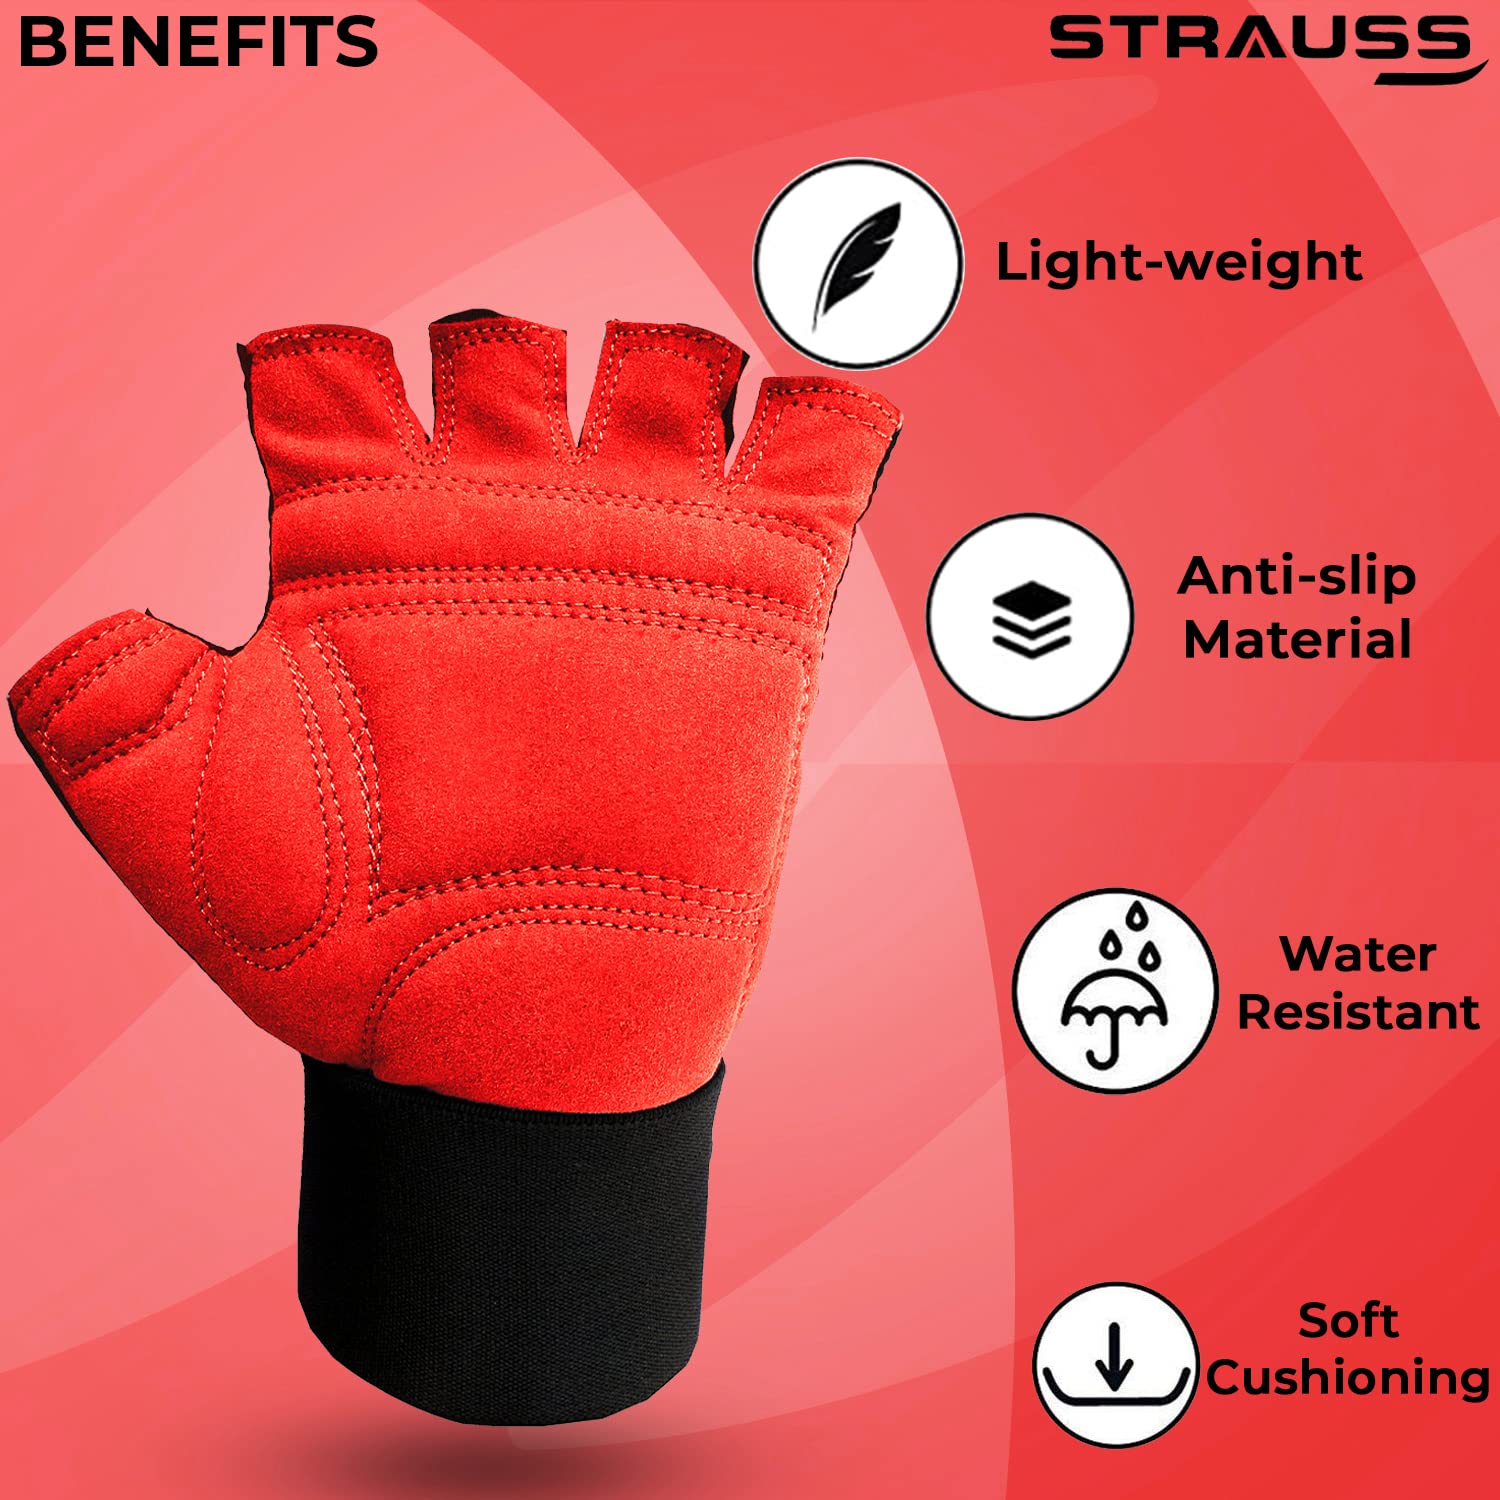 STRAUSS Suede Gym Gloves for Weightlifting, Training, Cycling, Exercise & Gym | Half Finger Design, 8mm Foam Cushioning, Anti-Slip & Breathable Lycra Material, (Red/Black), (Extra Large)